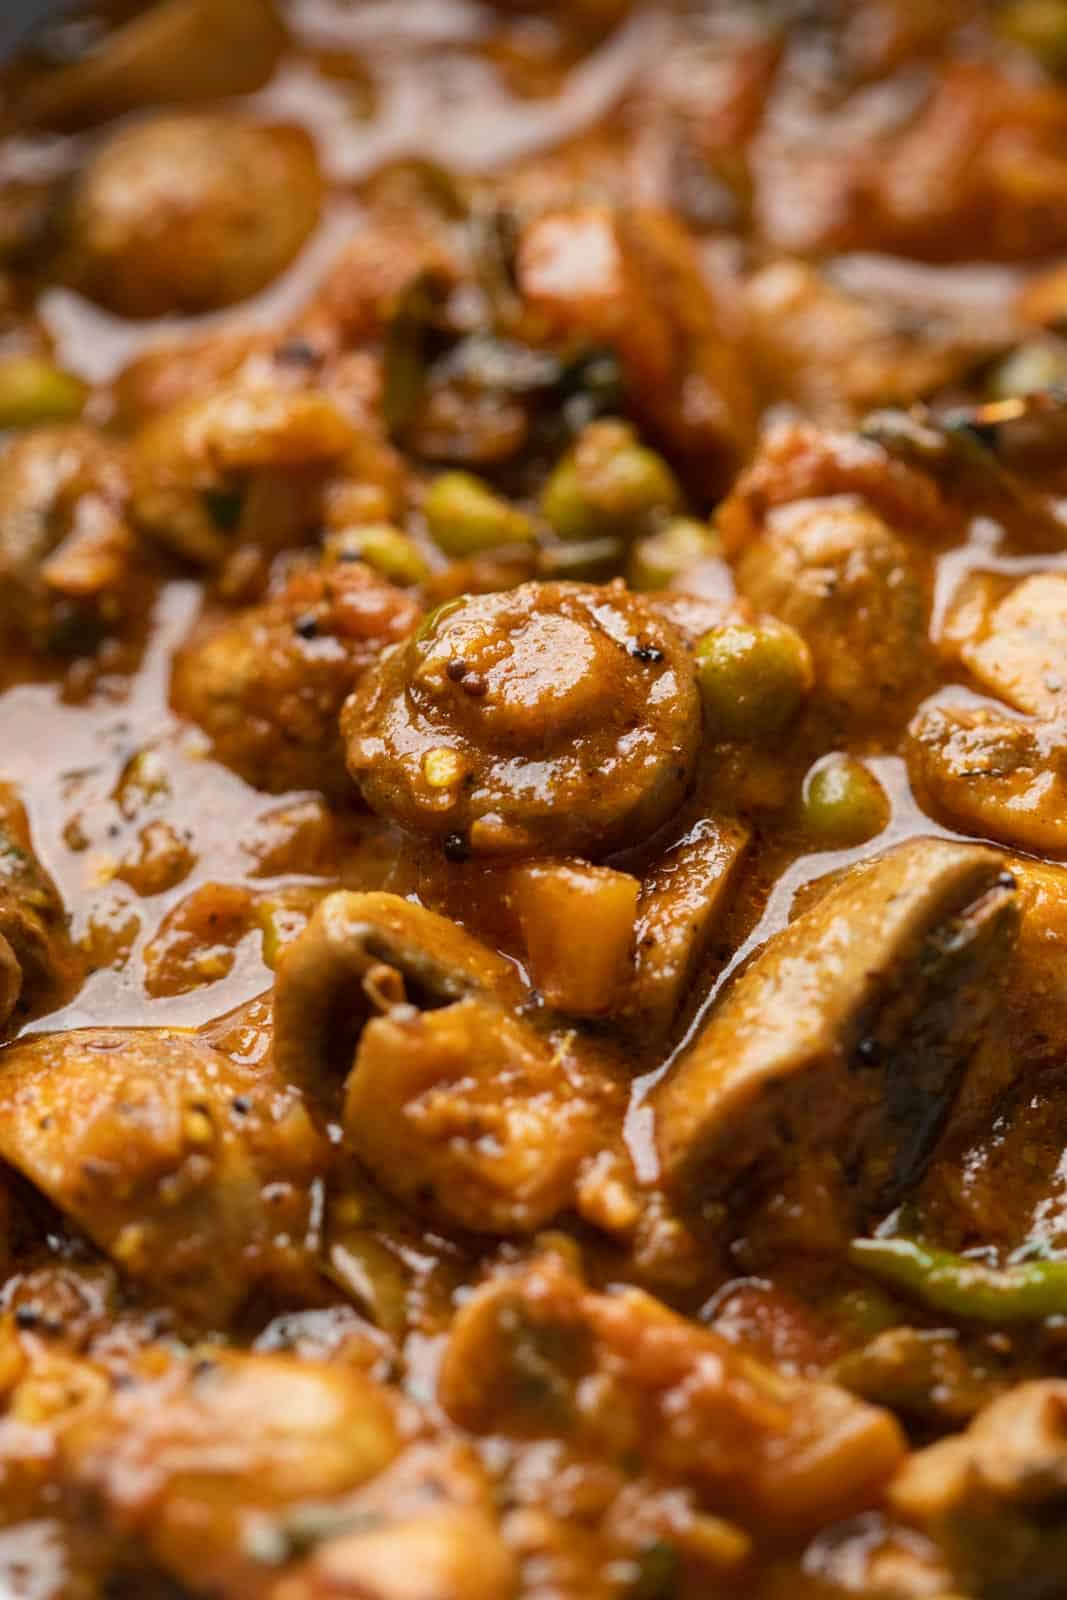 Close up picture of mushroom masala to show the texture of the gravy and the mushrooms